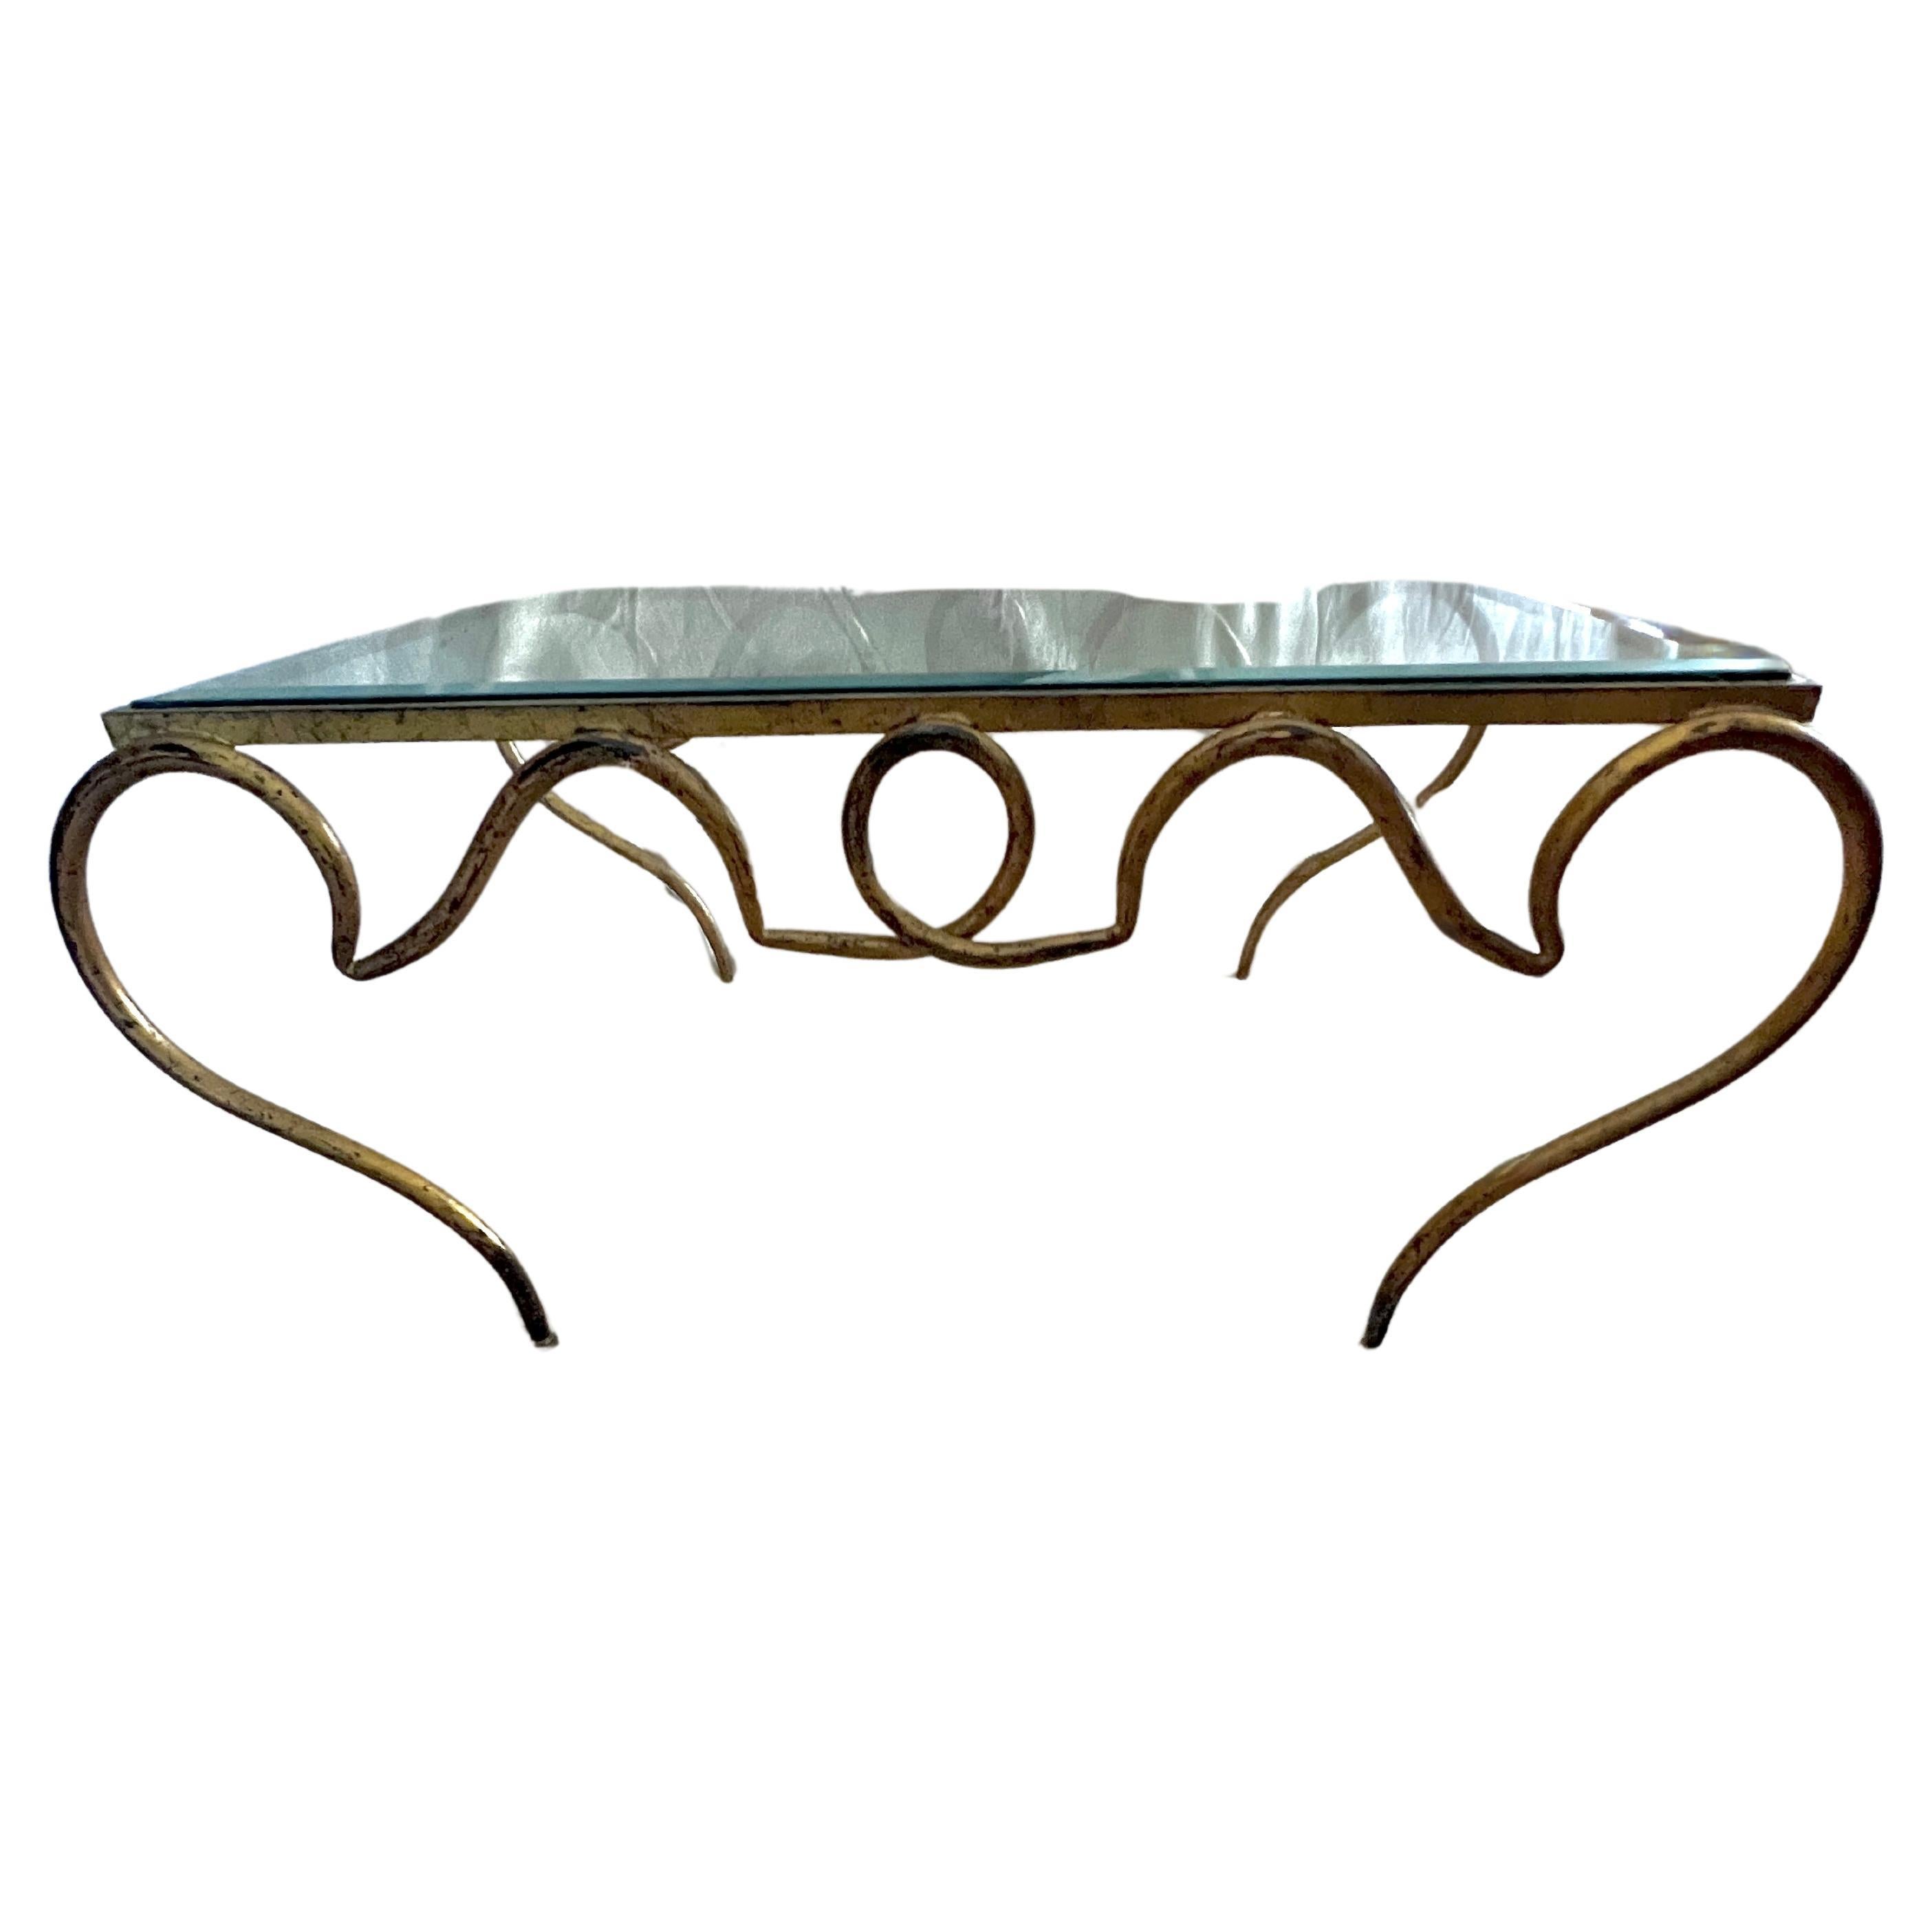 Stunning and elegant, this Rene Prou Scroll coffee table is a timeless piece.  While designed in the ca. 1940's the table is still relevant and sophisticated today.  Hand Forged wrought iron that has been gold leafed, making it chic for any living